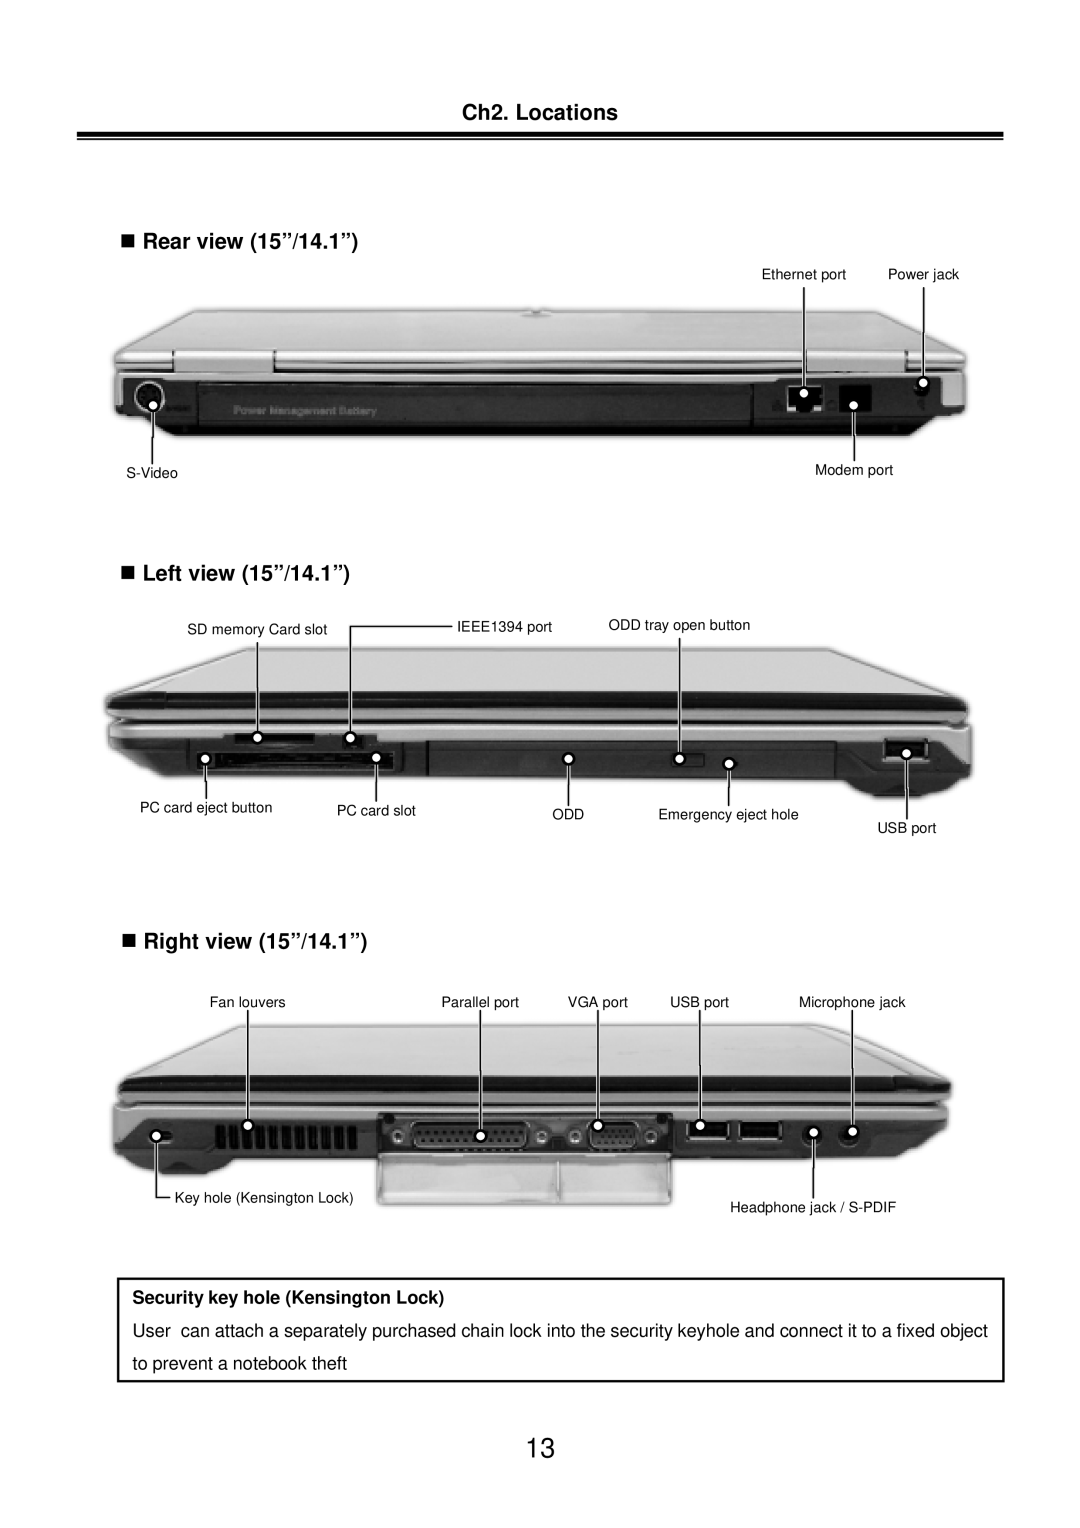 LG Electronics LM50 service manual Ch2. Locations „ Rear view 15”/14.1”, „ Left view 15”/14.1”, „ Right view 15”/14.1” 